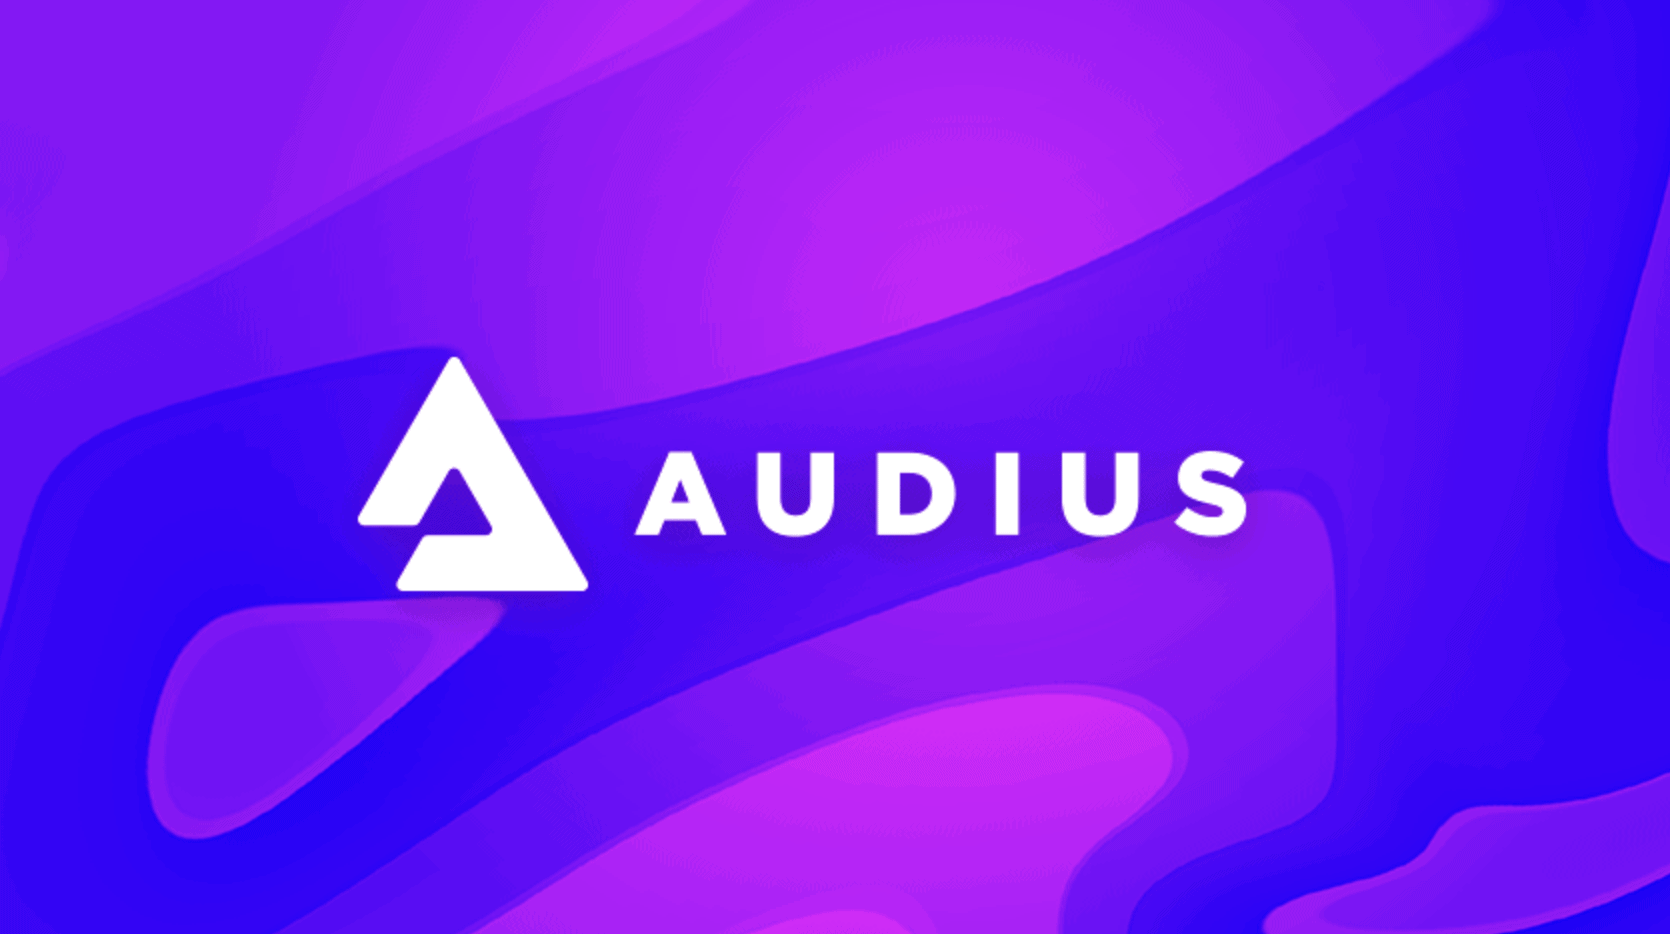 Audius hacked for $1 million by a malicious proposal